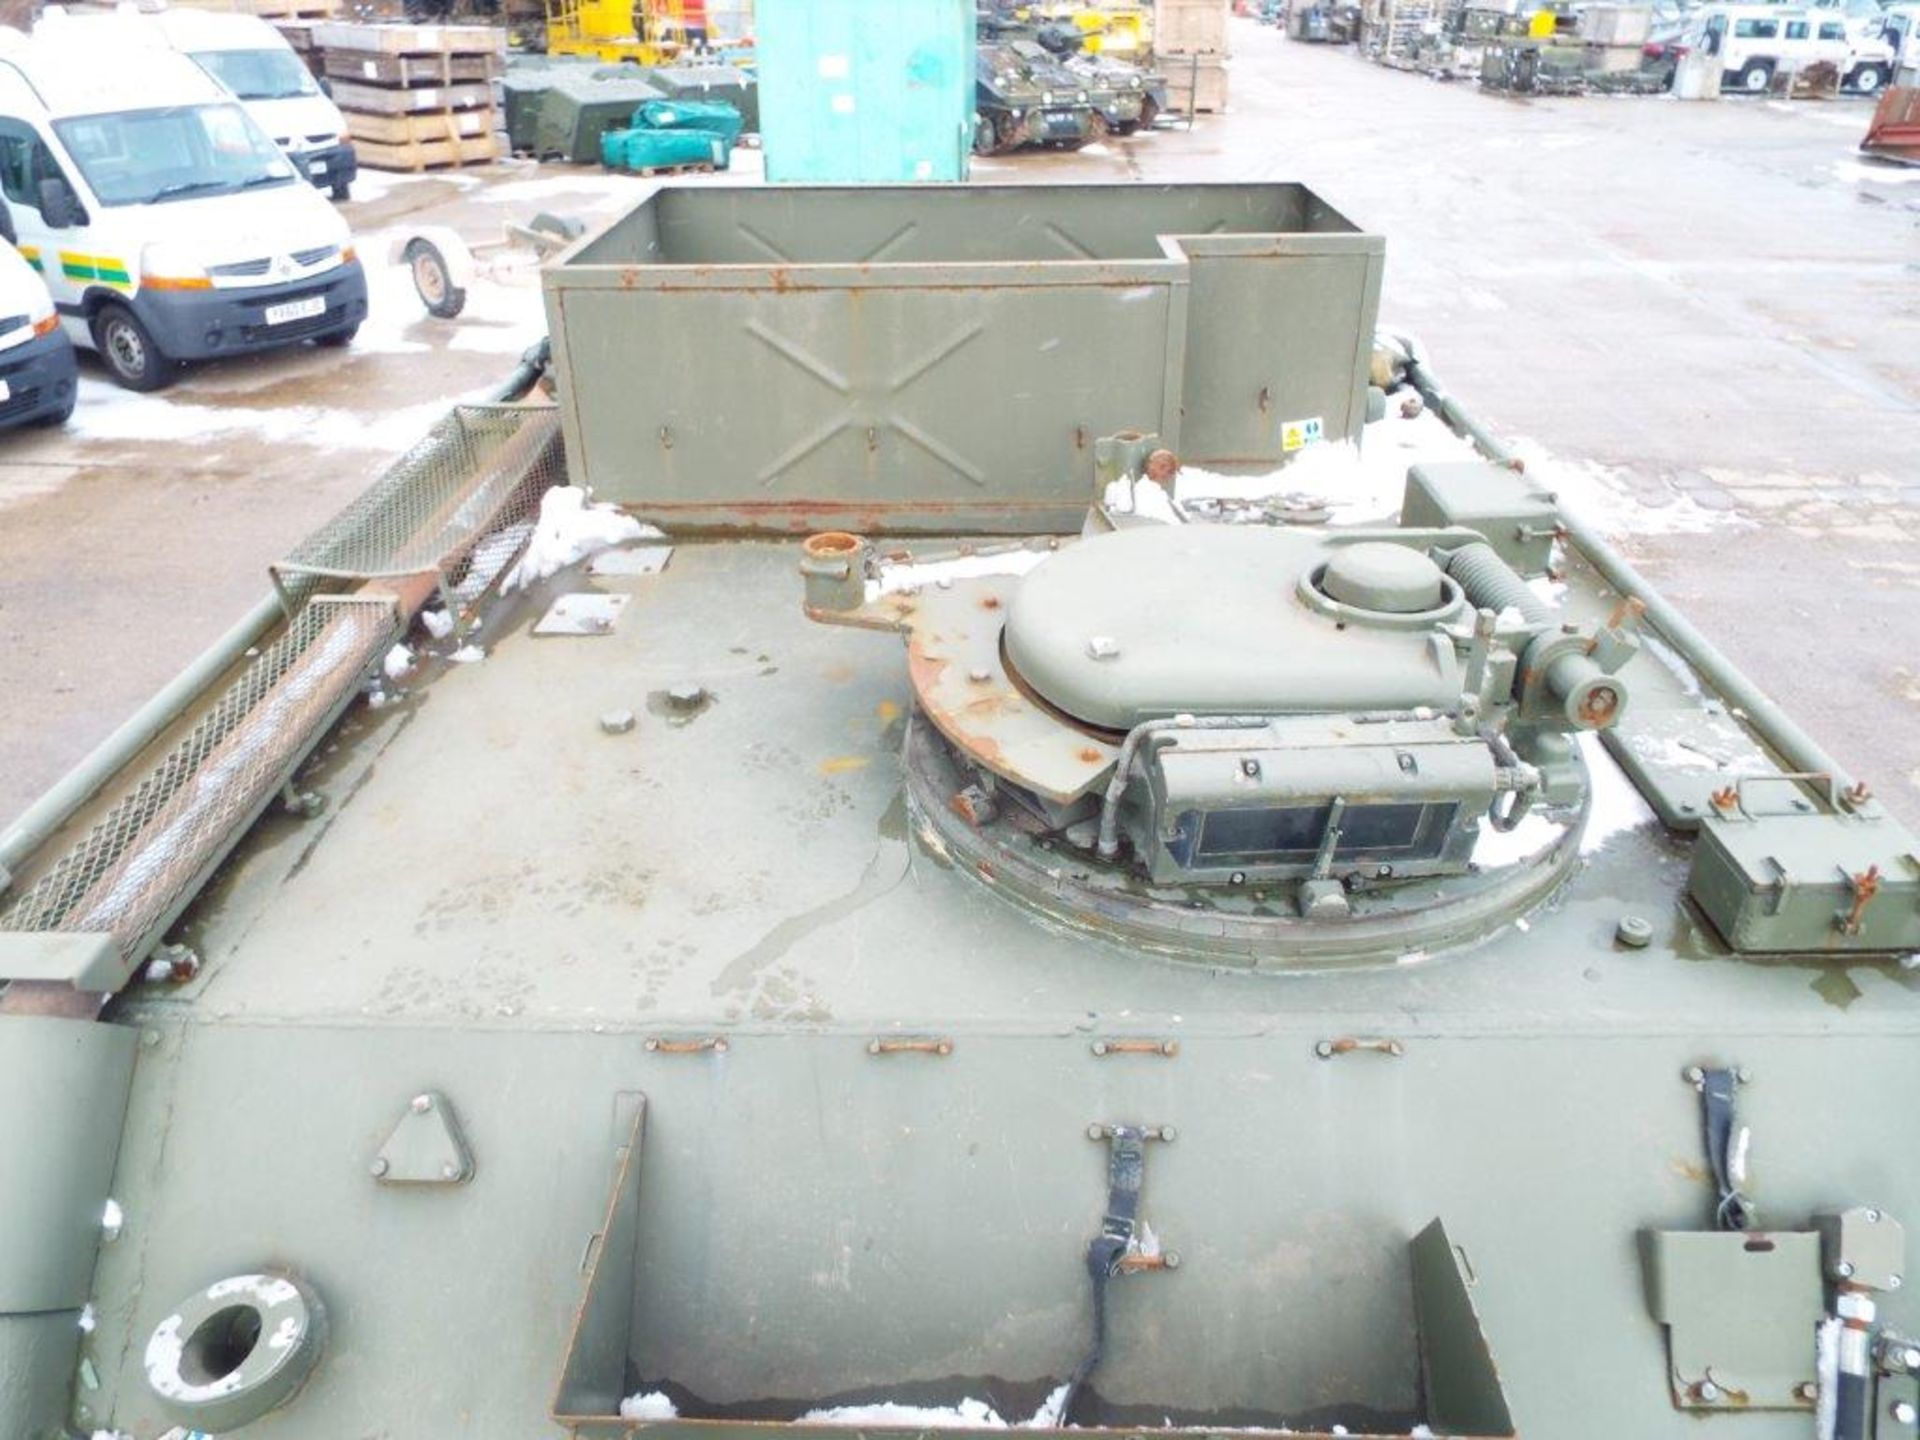 Dieselised CVRT FV105 Sultan Armoured Personnel Carrier with David Brown TN15e Gearbox - Image 9 of 26